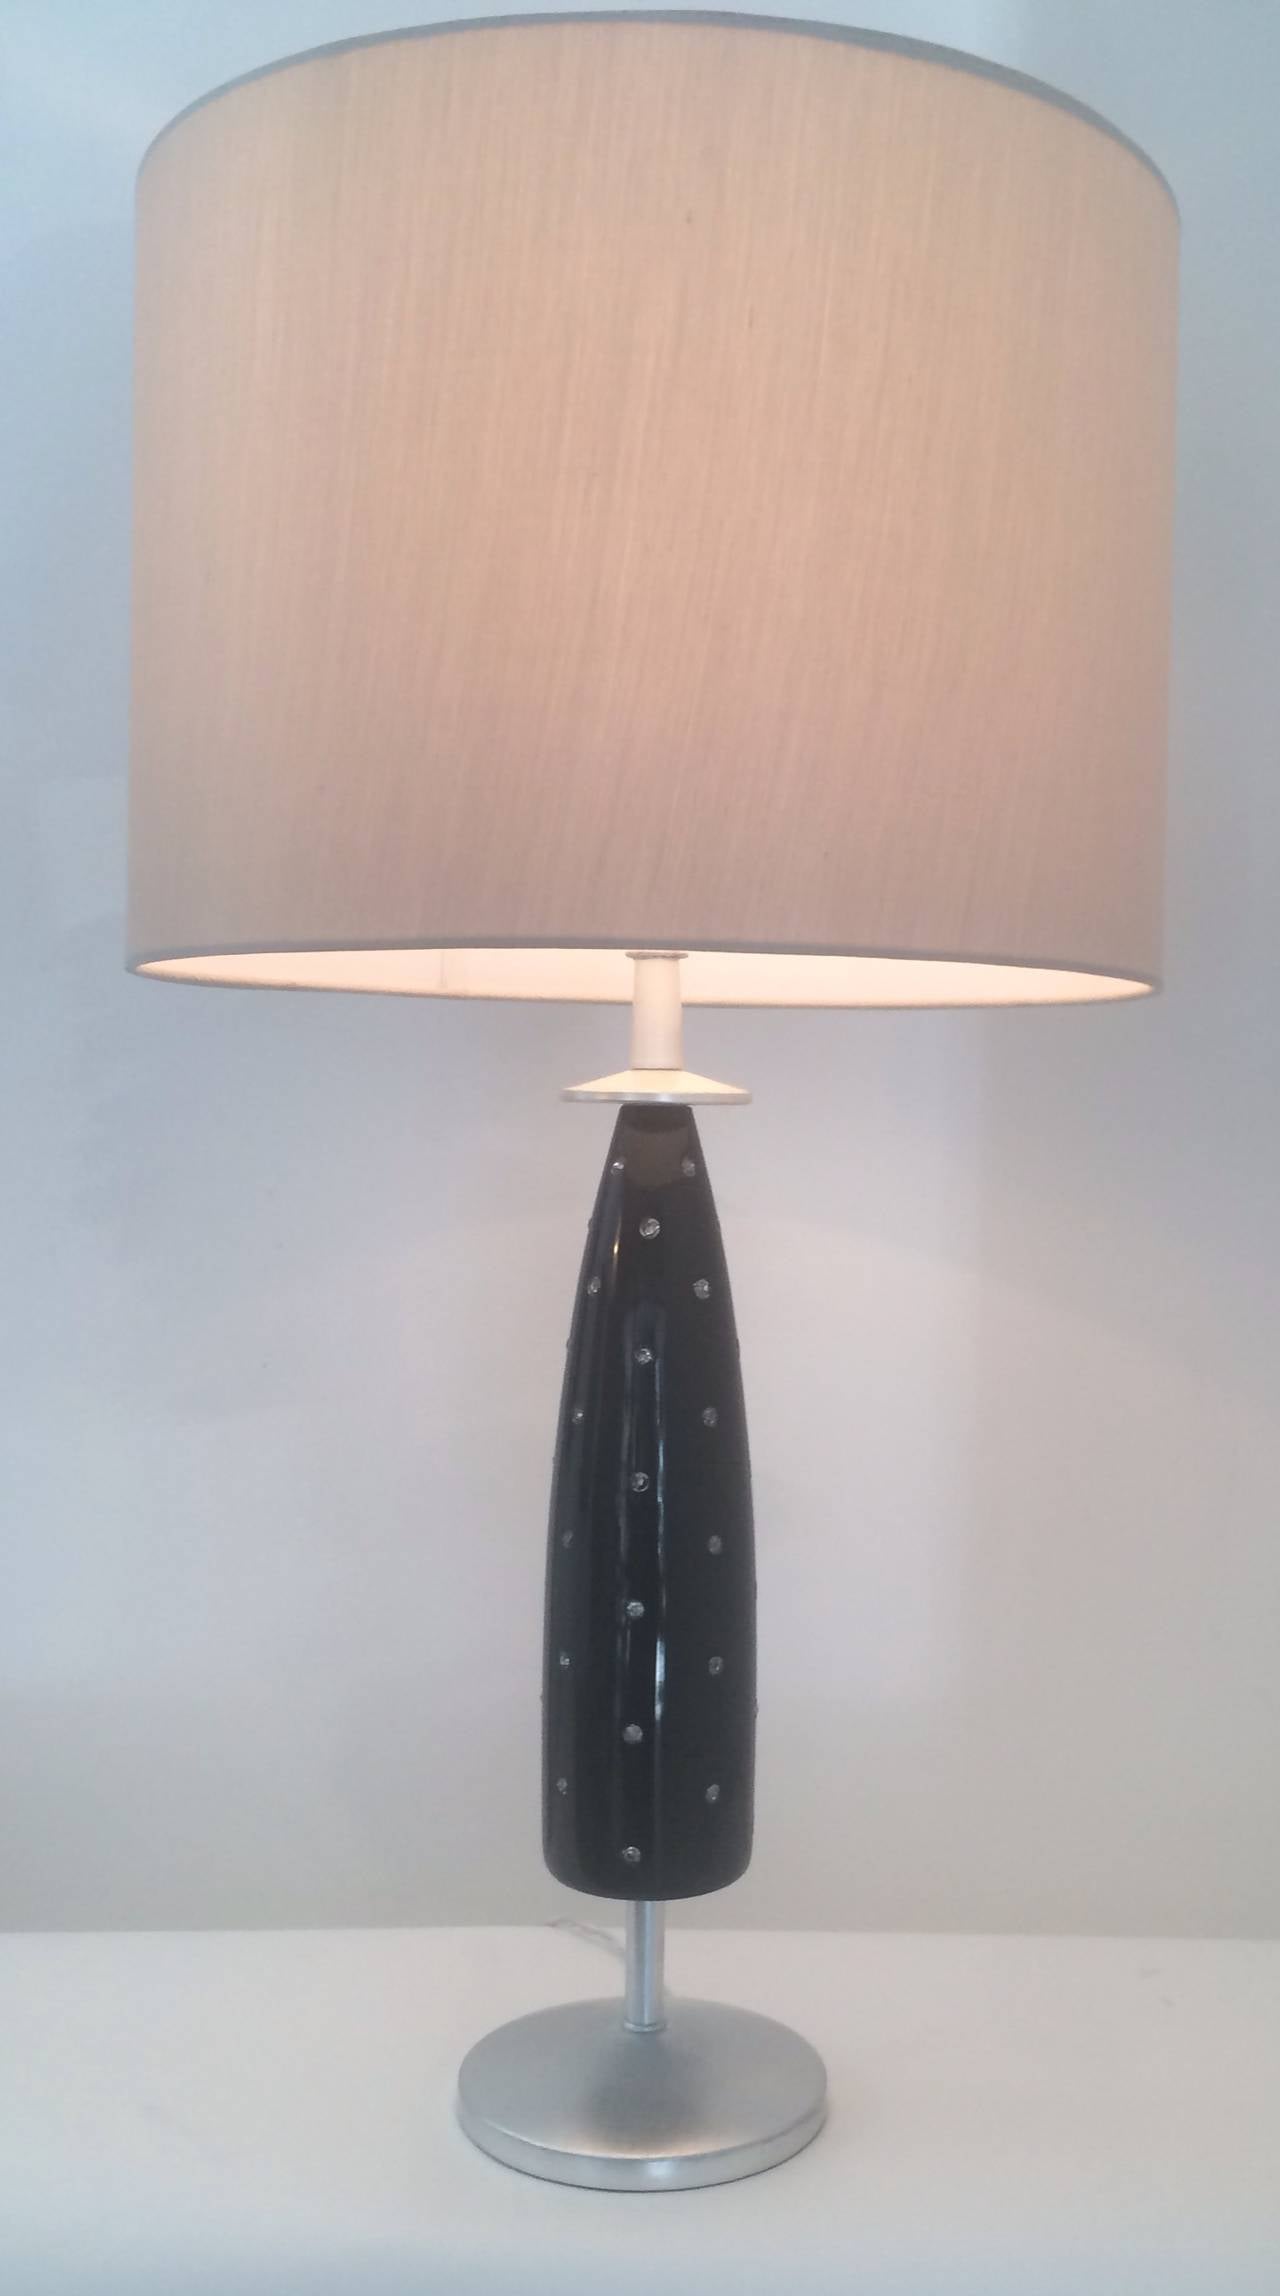 Most unique and elegant table lamp by Tommi Parzinger, 1950s.  Black lacquer base with crystals.